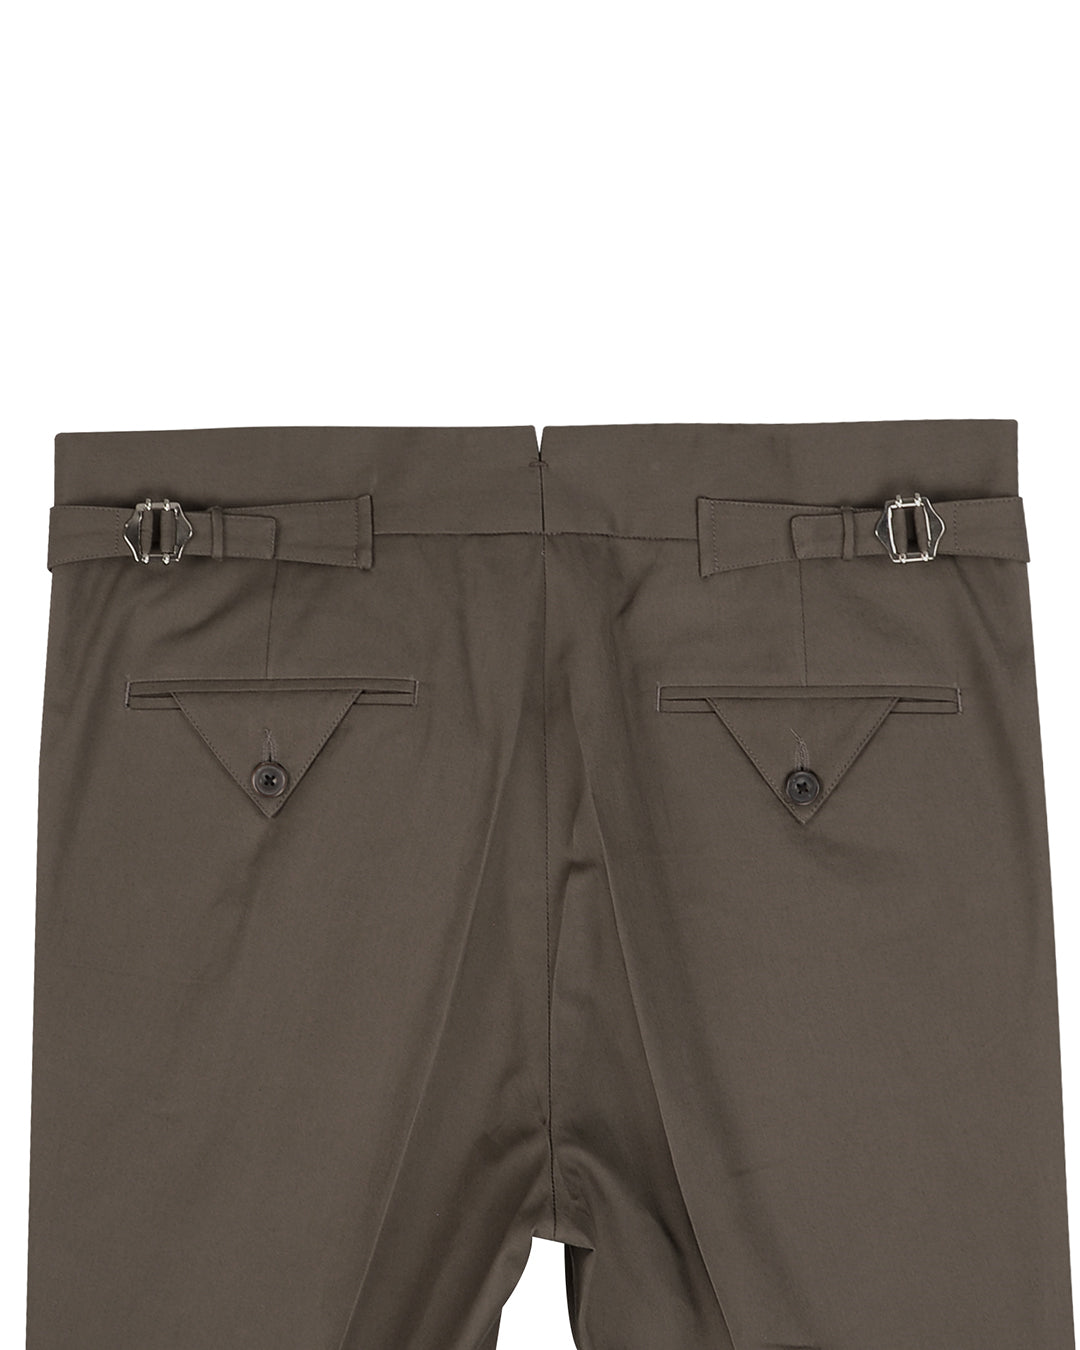 Cotton: Taupe Summer Twill